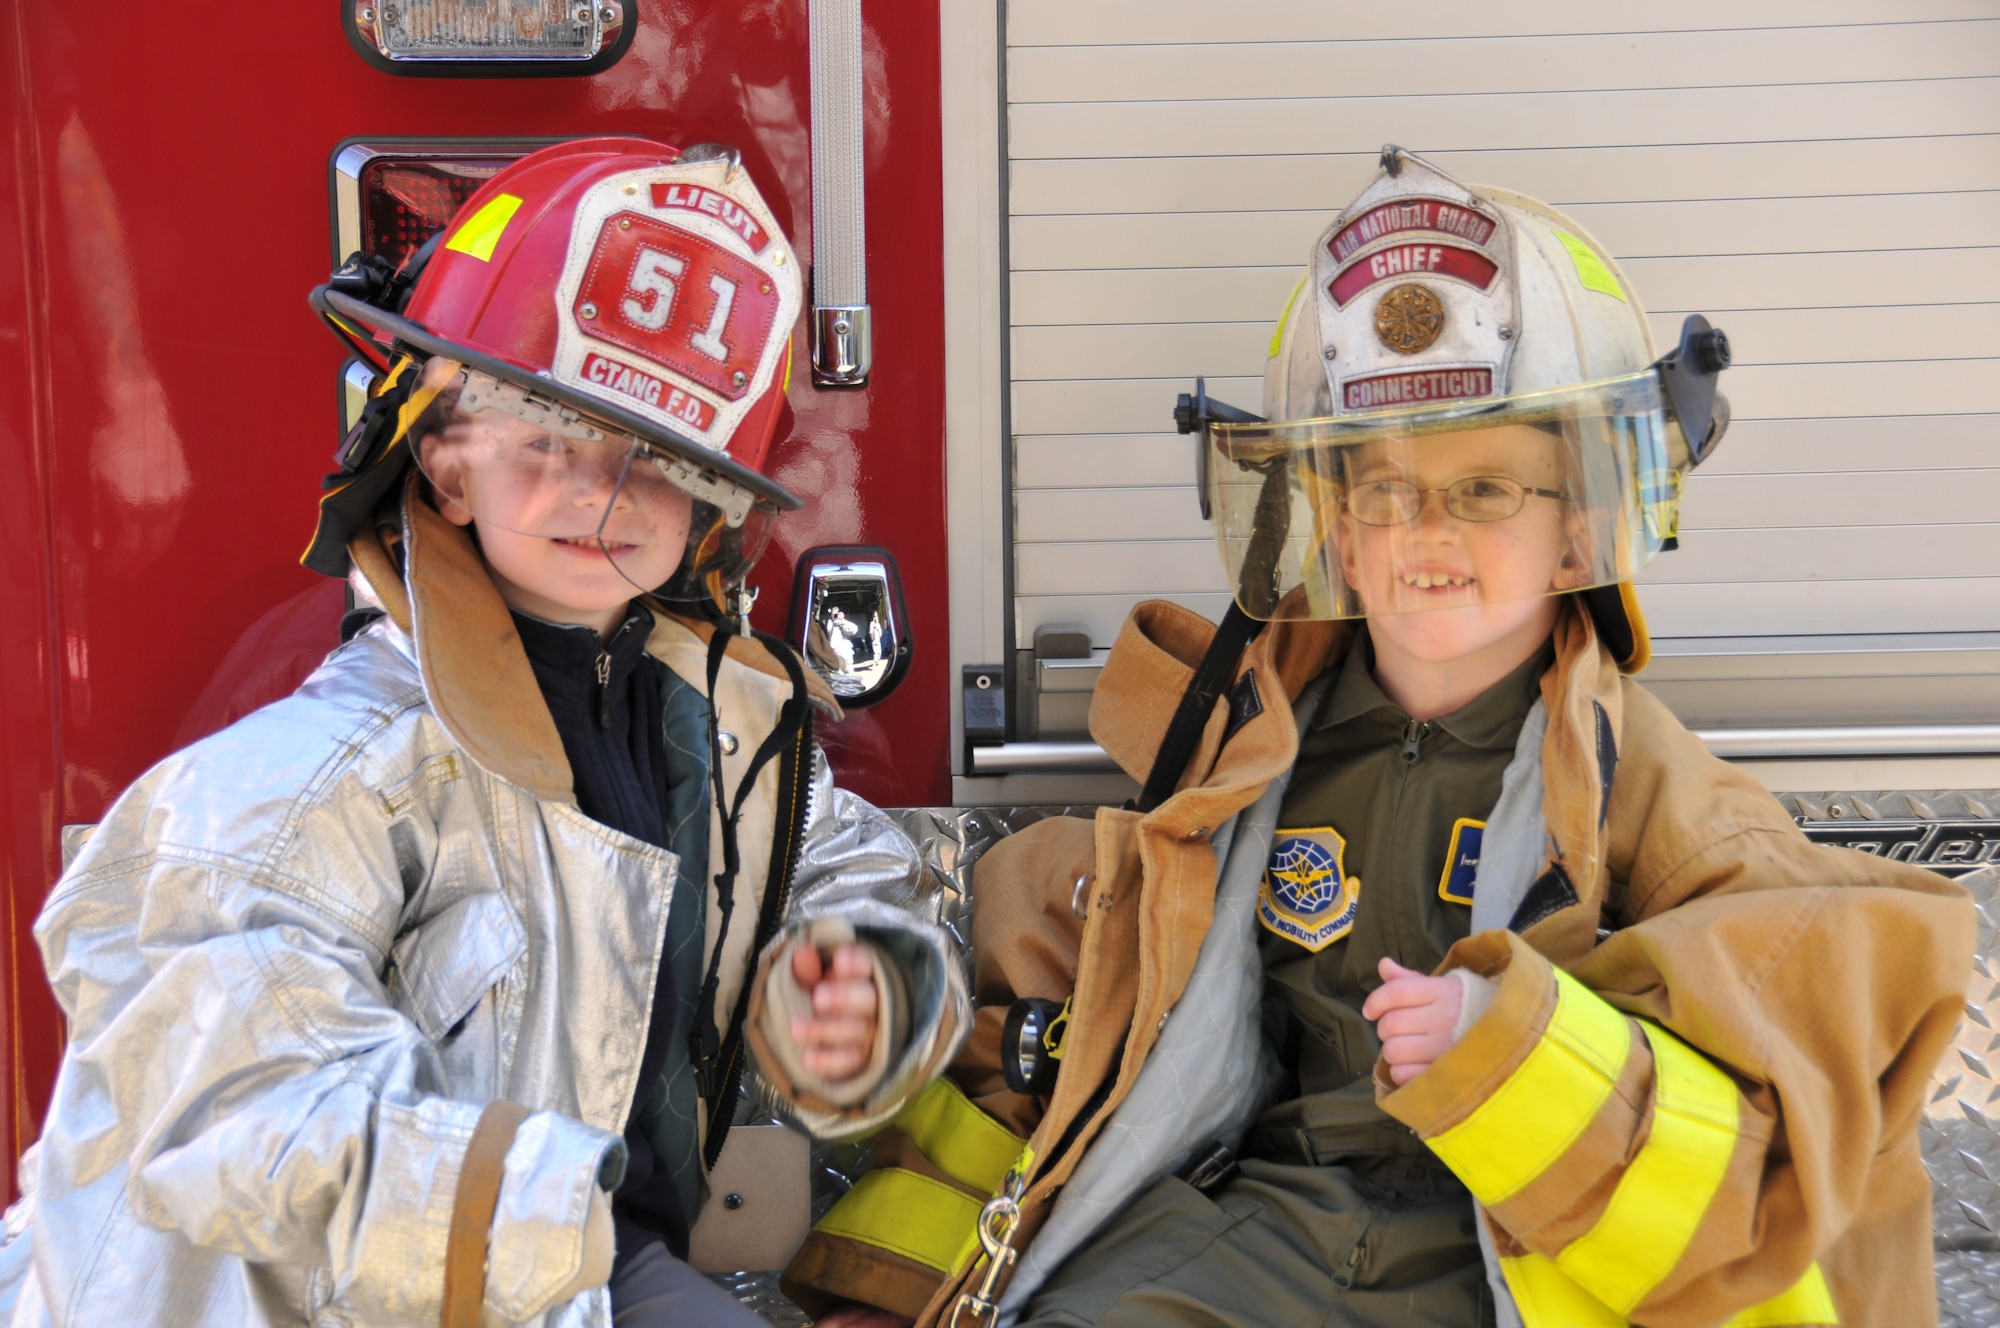 Logan Schoenhardt and his friend, Andrew Kerwin, pose wearing fire-fighting equipment during the Pilot for A Day Program at Bradley Air National Guard Base, East Granby, Conn., May 3, 2013. (Air National Guard photo by Senior Airman Jennifer Pierce/Released)